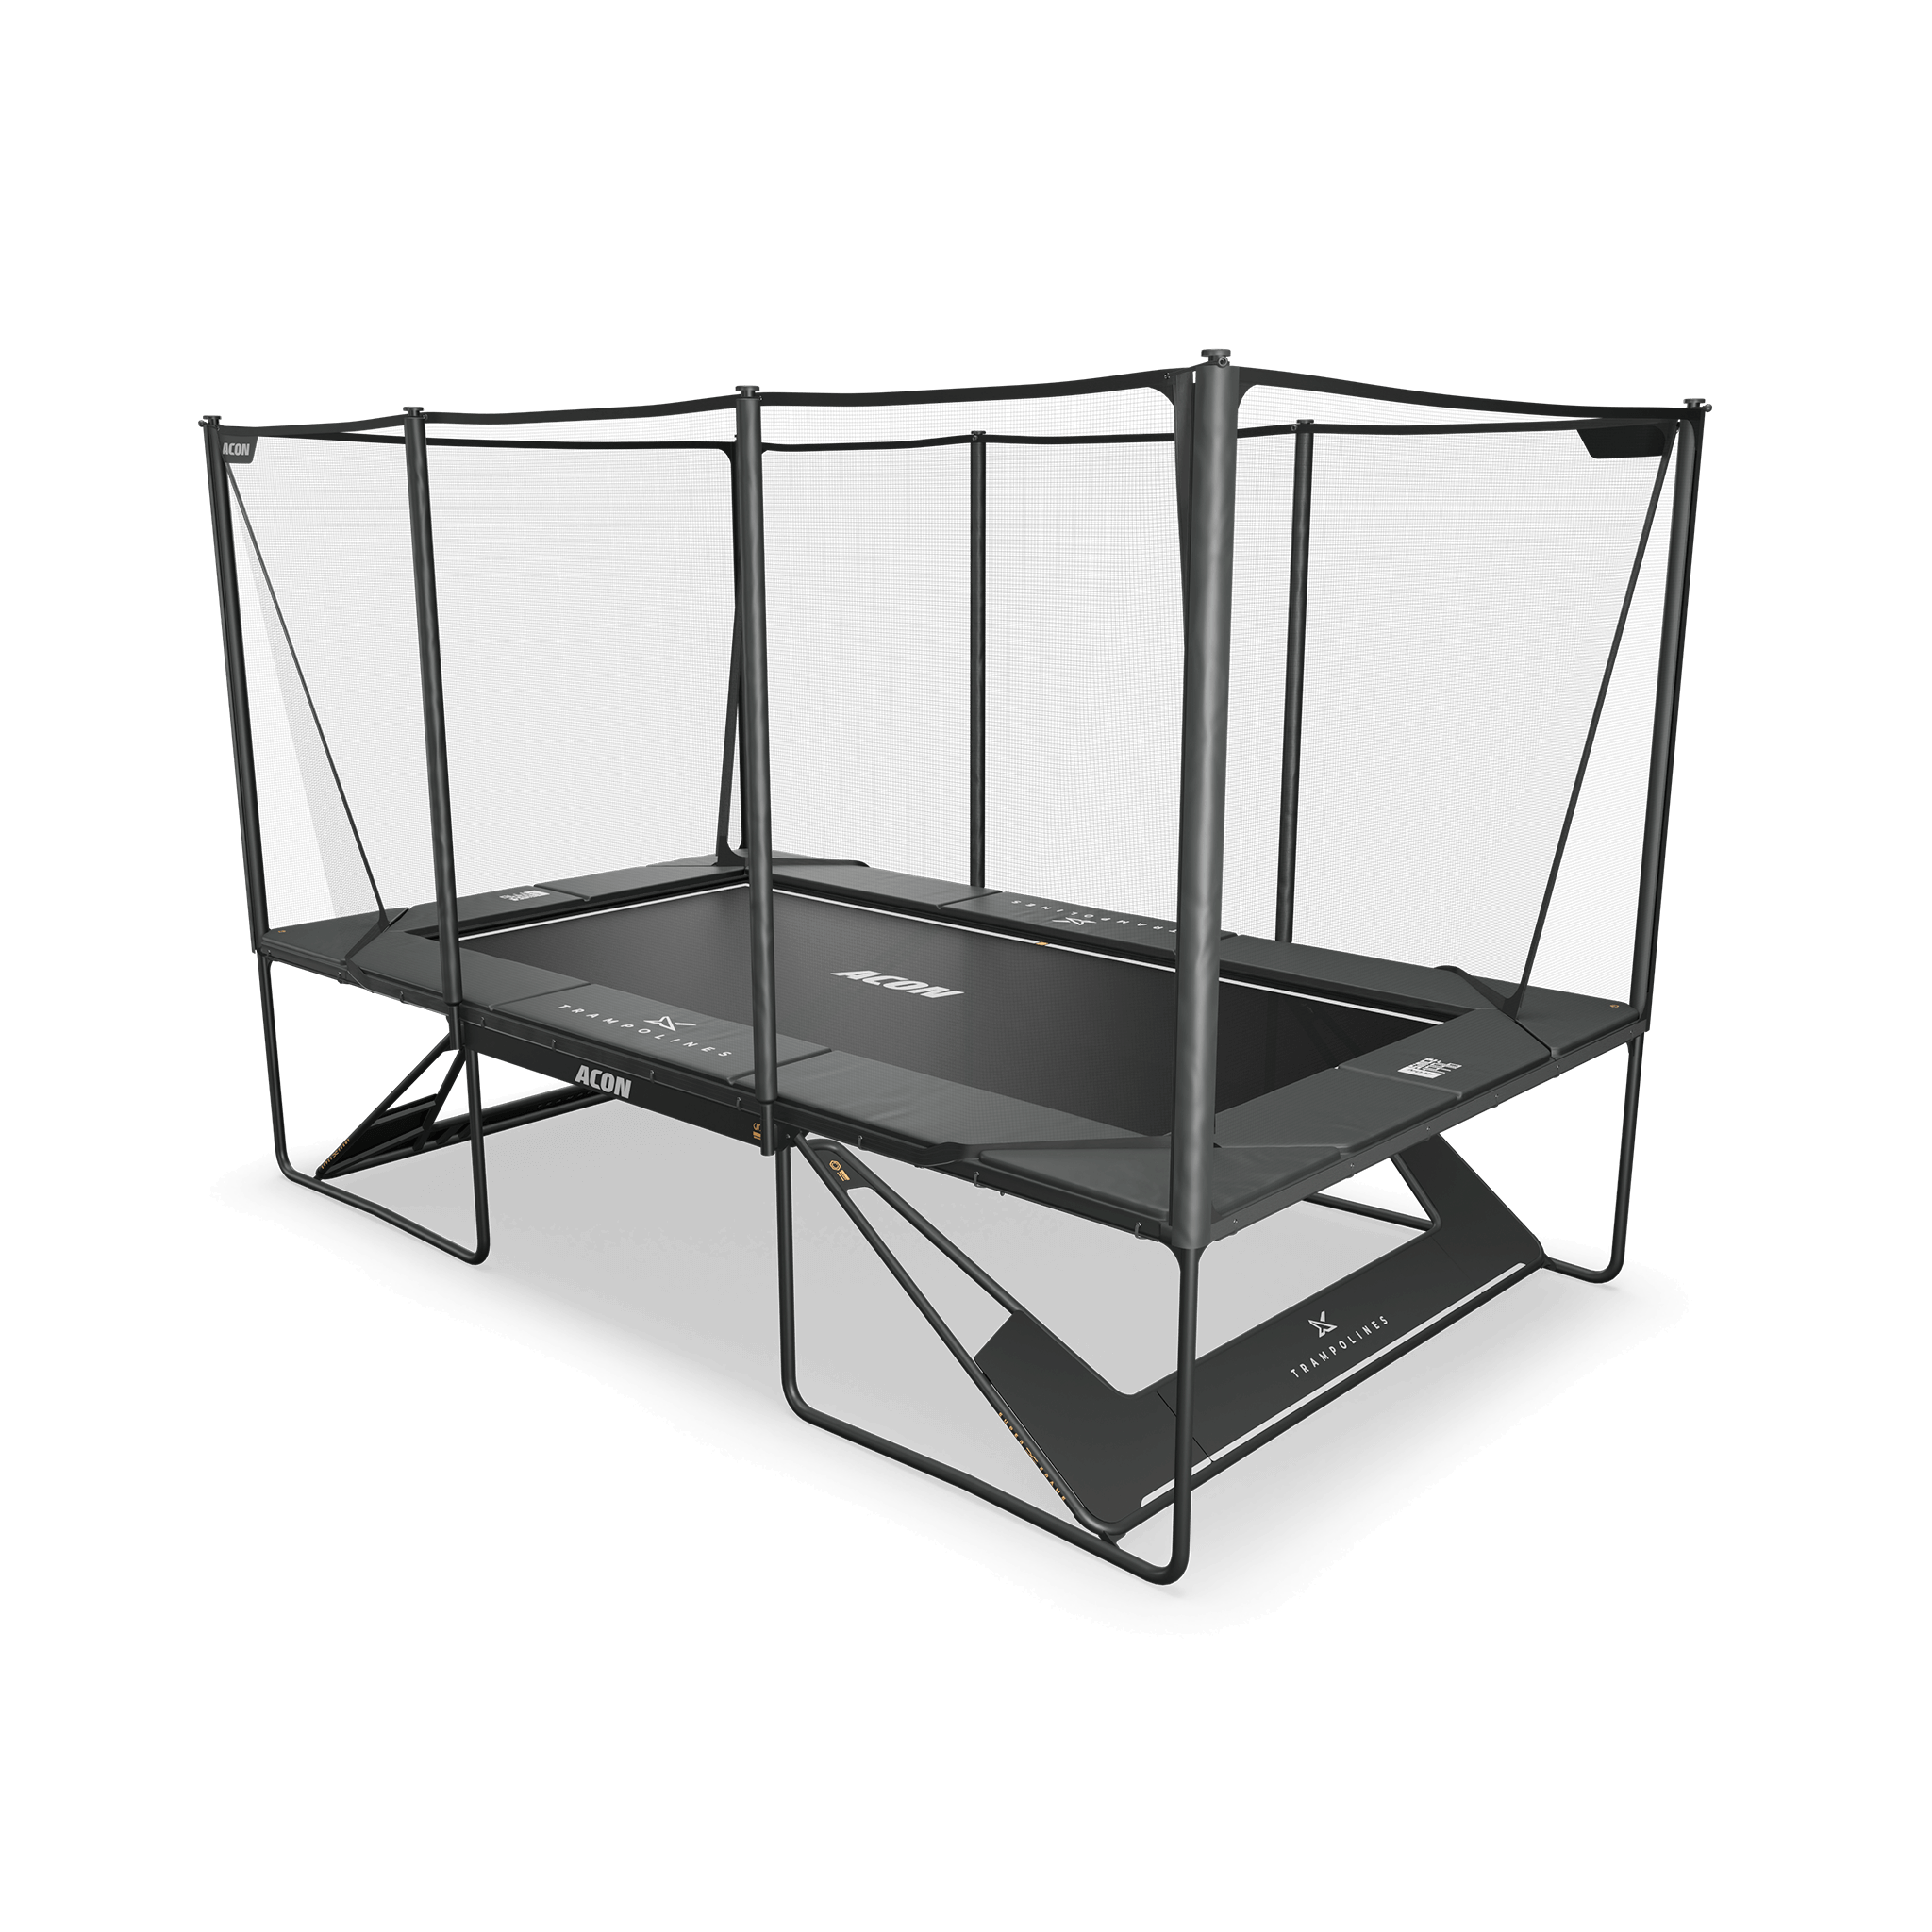 ACON X 17ft Rectangular Trampoline with Net and Ladder, Black. & 10111-X-BL